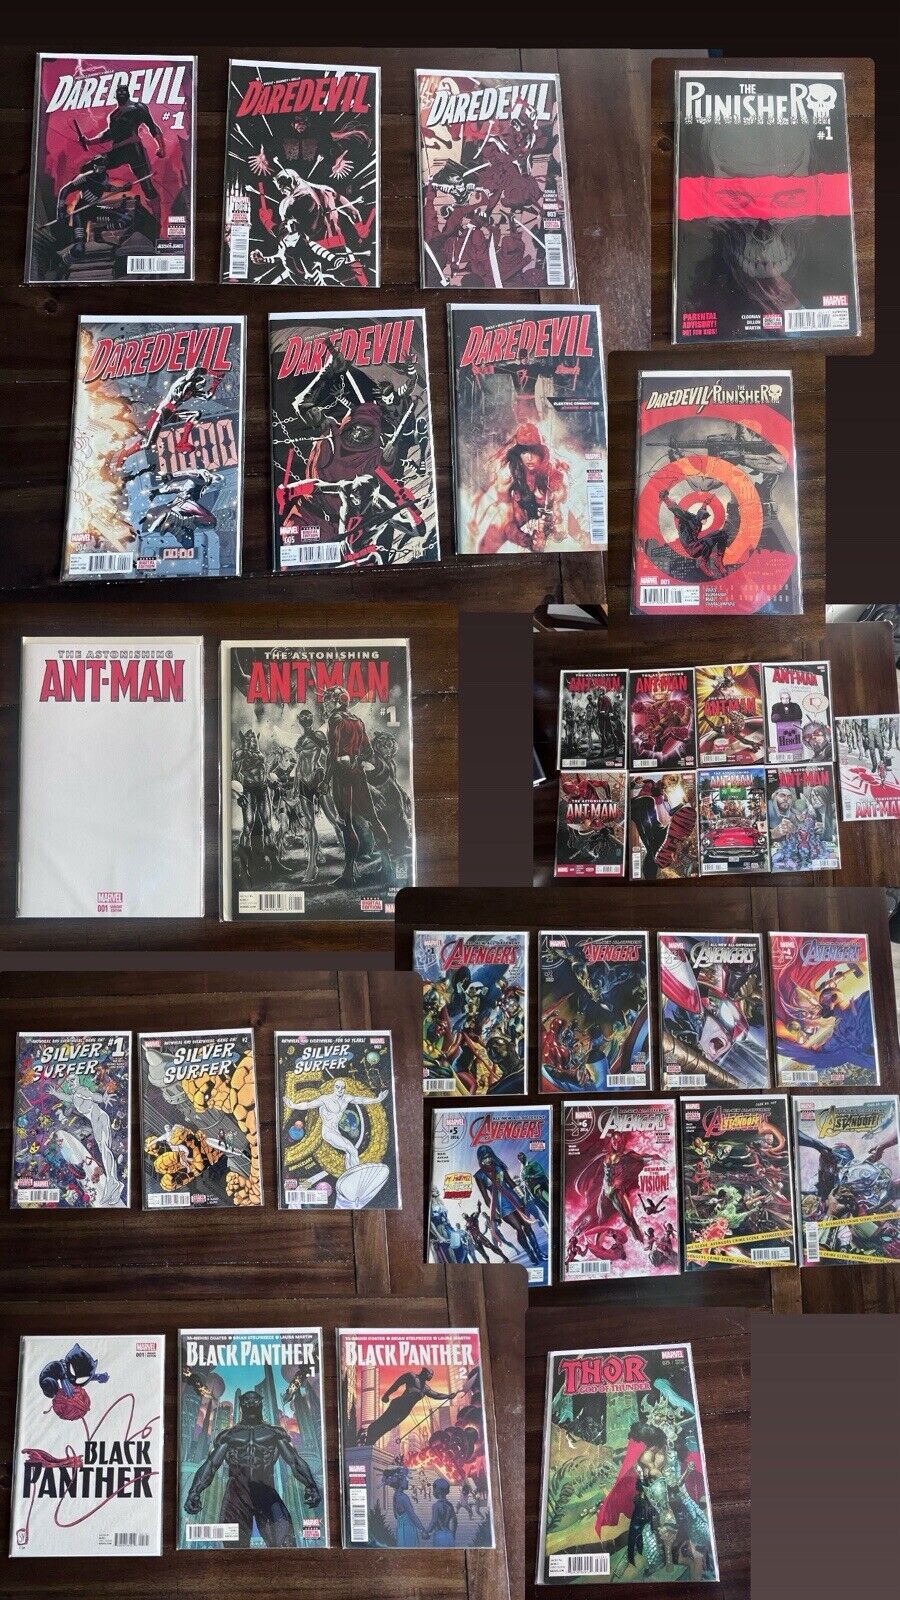 Black Panther Dare Devil Punisher ANAD Avengers Ant-Man First Print Comics